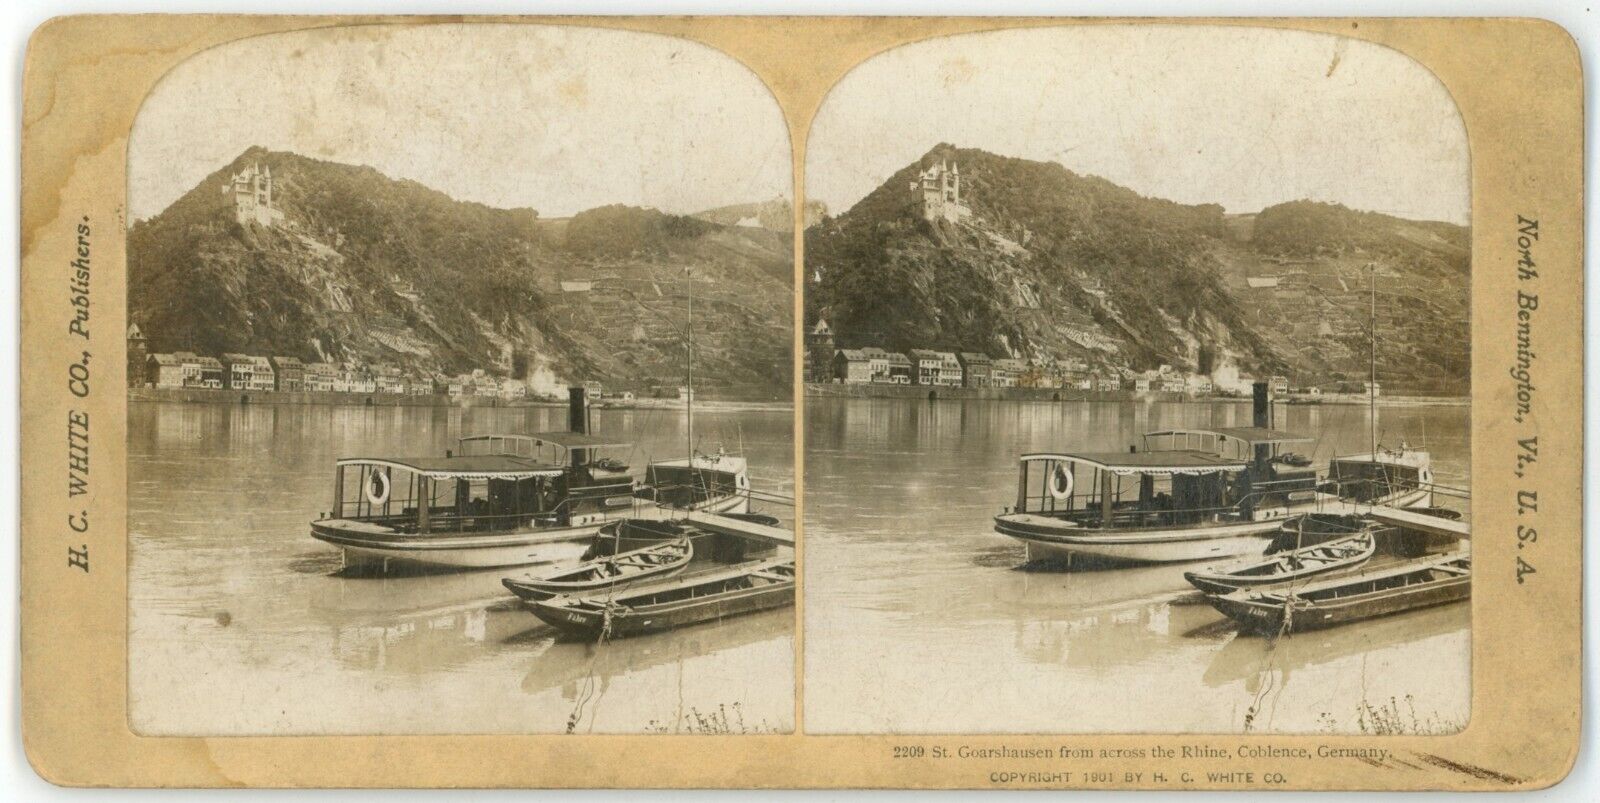 c1900's Real Photo Stereoview Card St. Goarshausen From Across the Rhine Germany